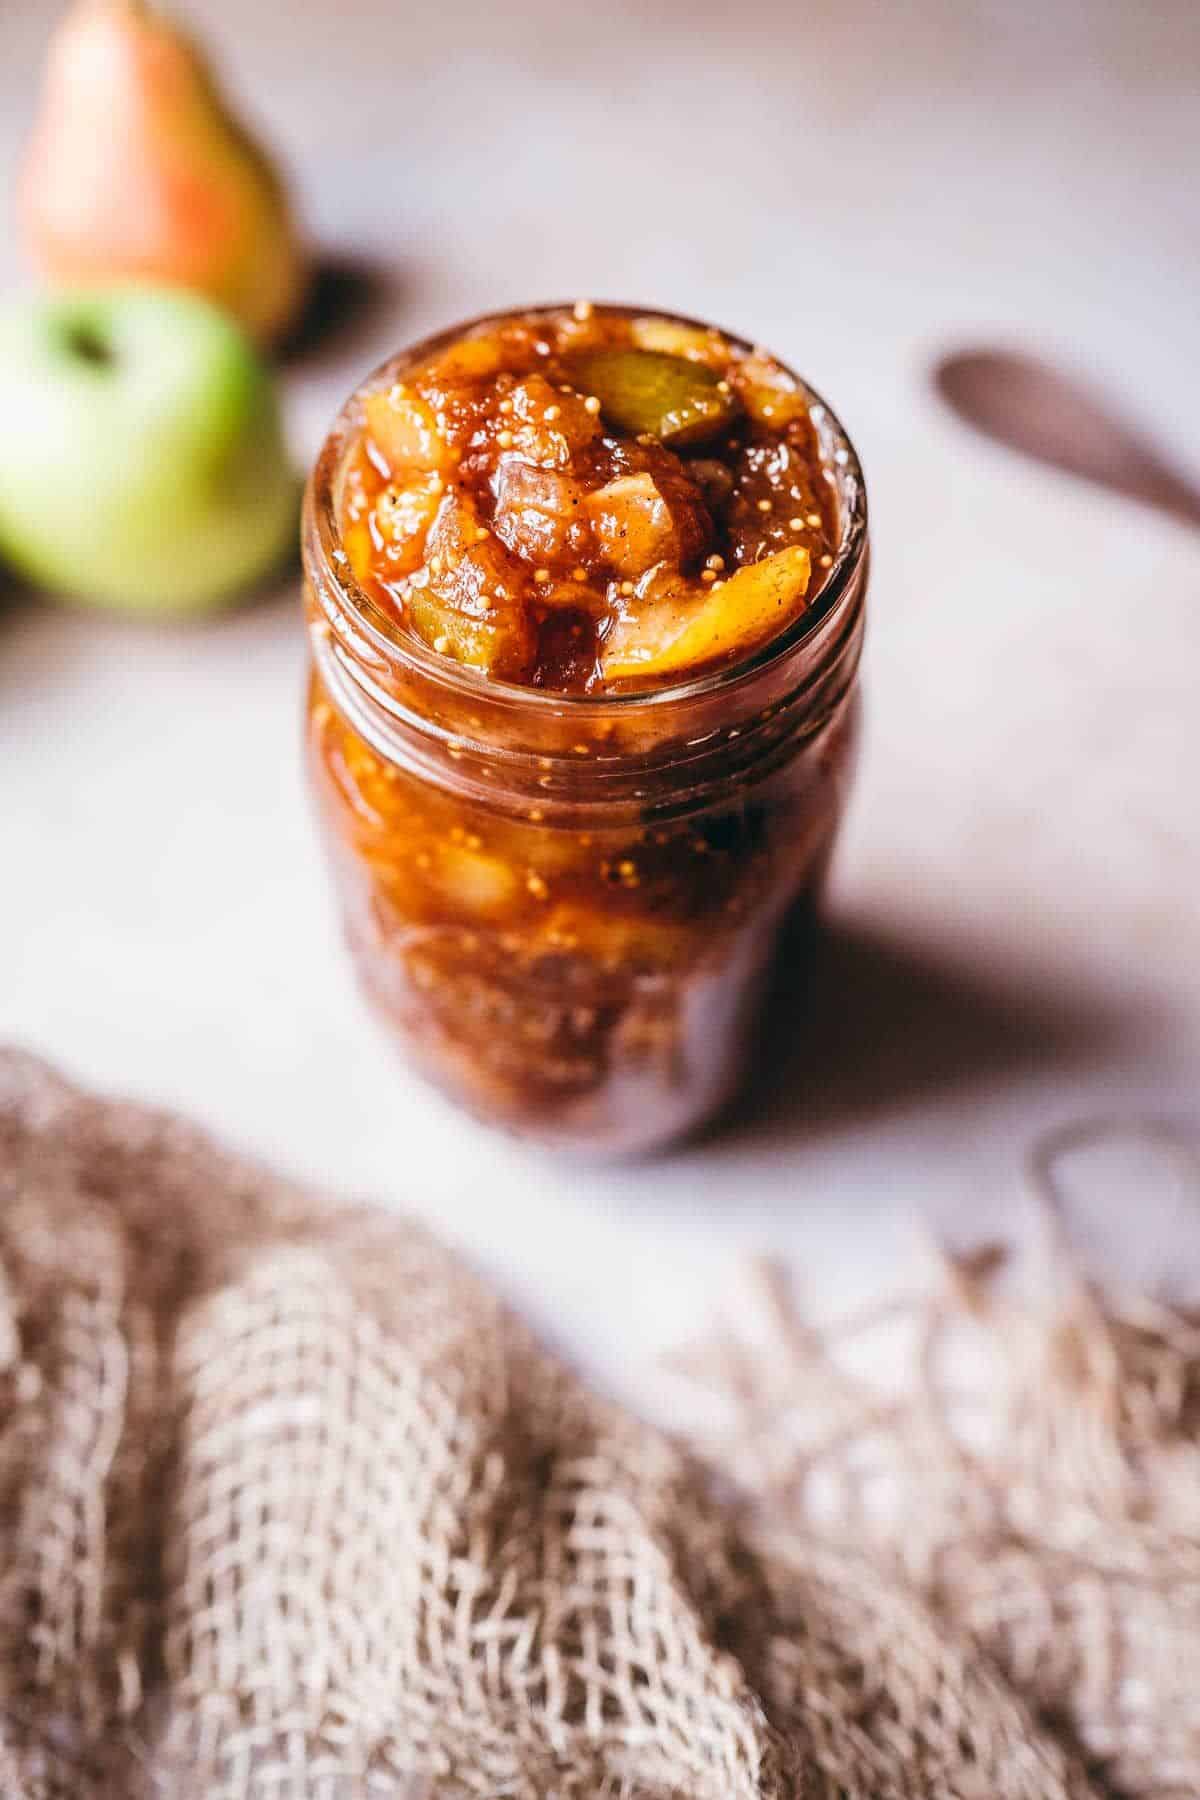 Delicious apple and pear chutney in a glass jar.